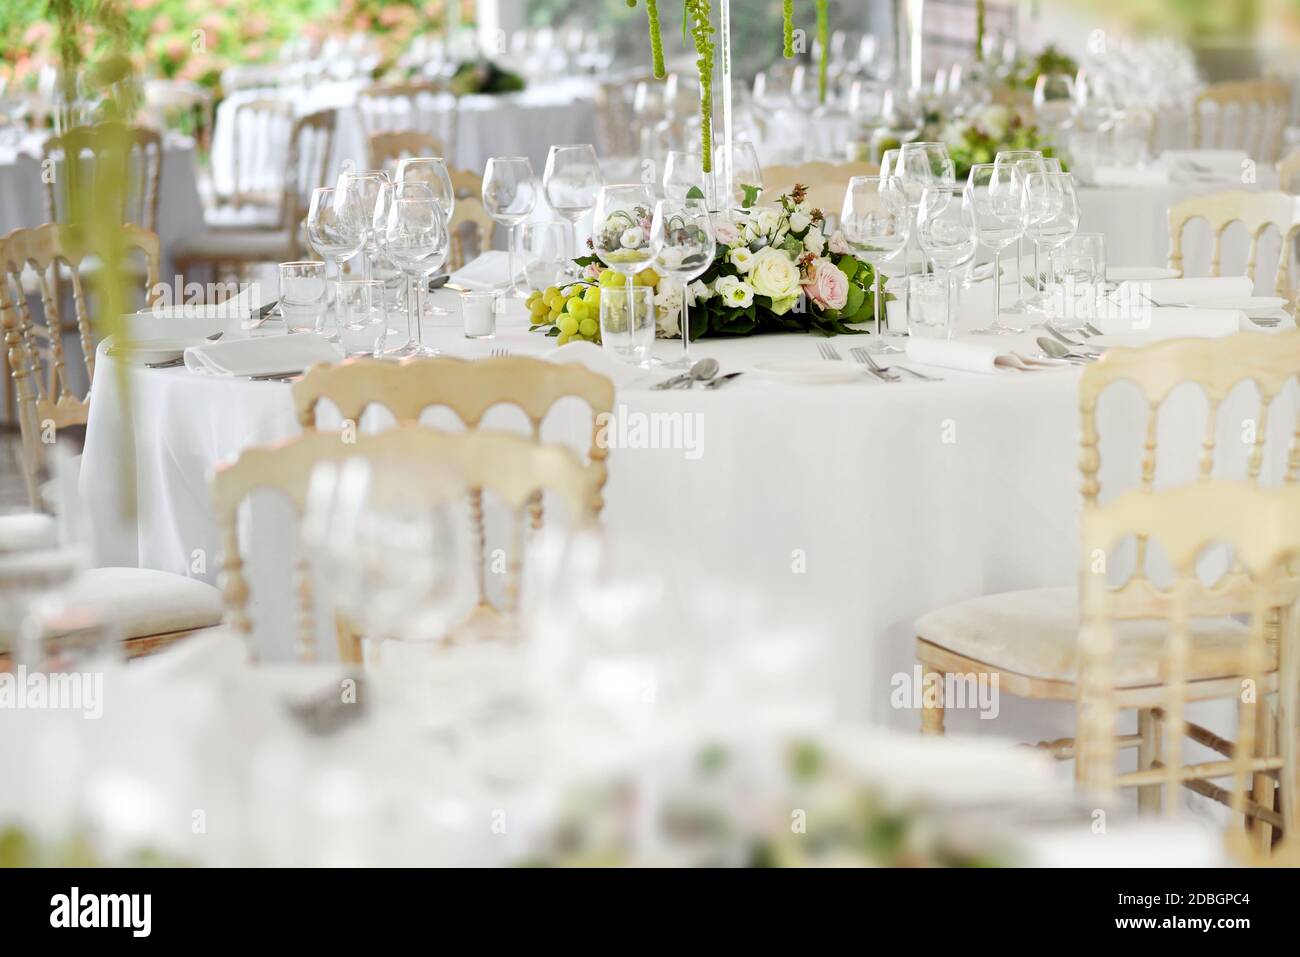 Formal table settings at a wedding venue with stylish white chairs, elegant glassware and silverware around floral centrepieces with selective focus t Stock Photo